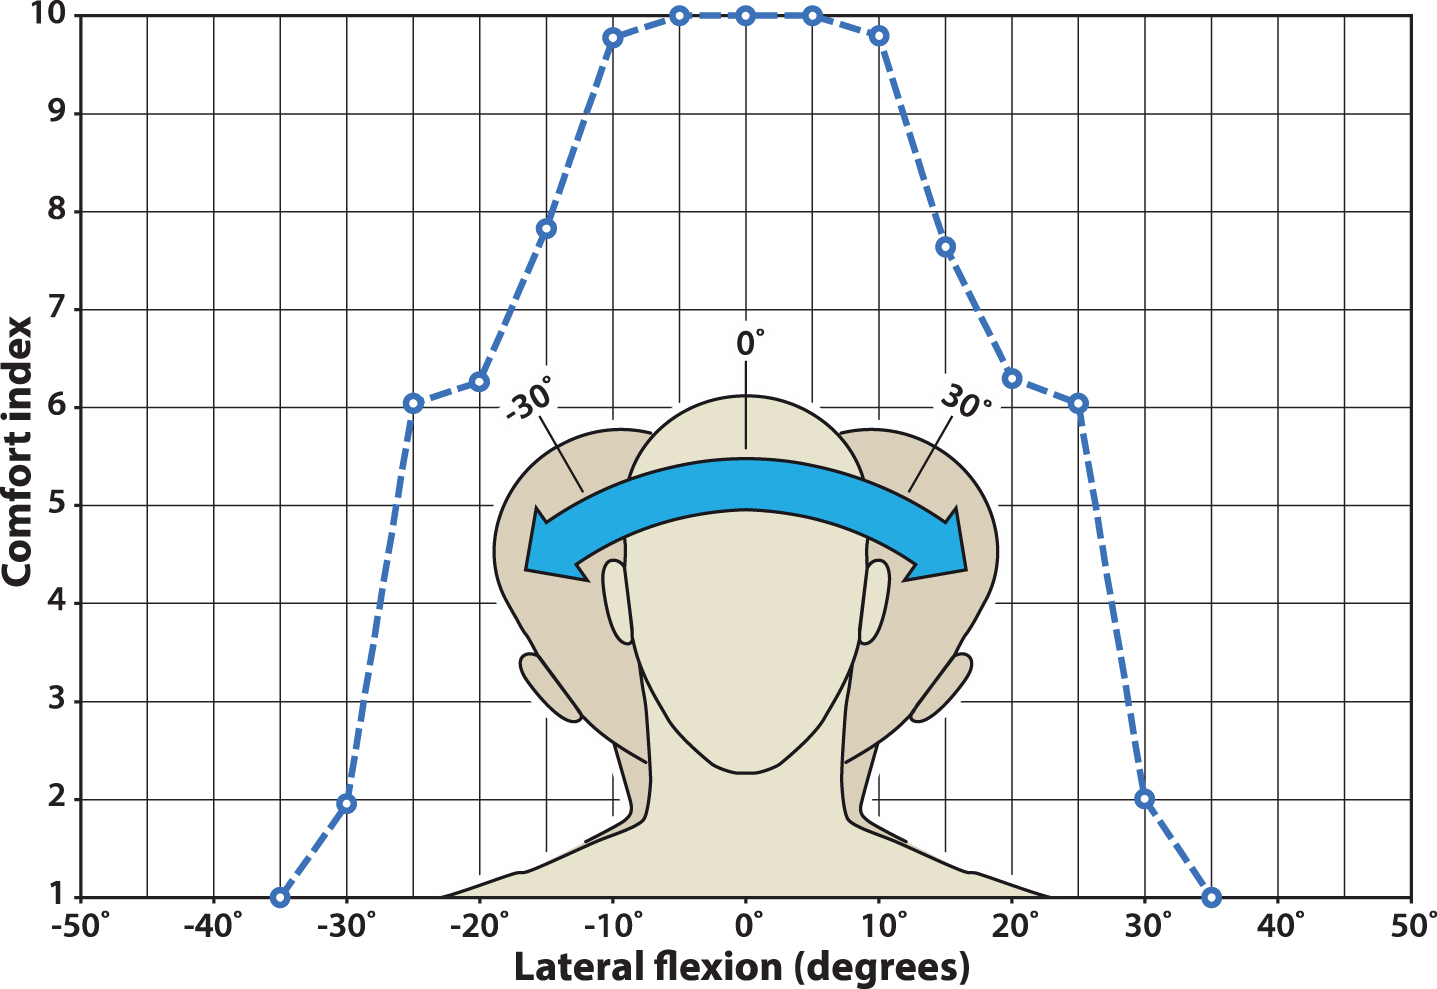 Relation between head angle (posture) and comfort, showing the comfort rating (10-point scale) for degrees of lateral flexion of the head (n = 100). From Naddeo [43].